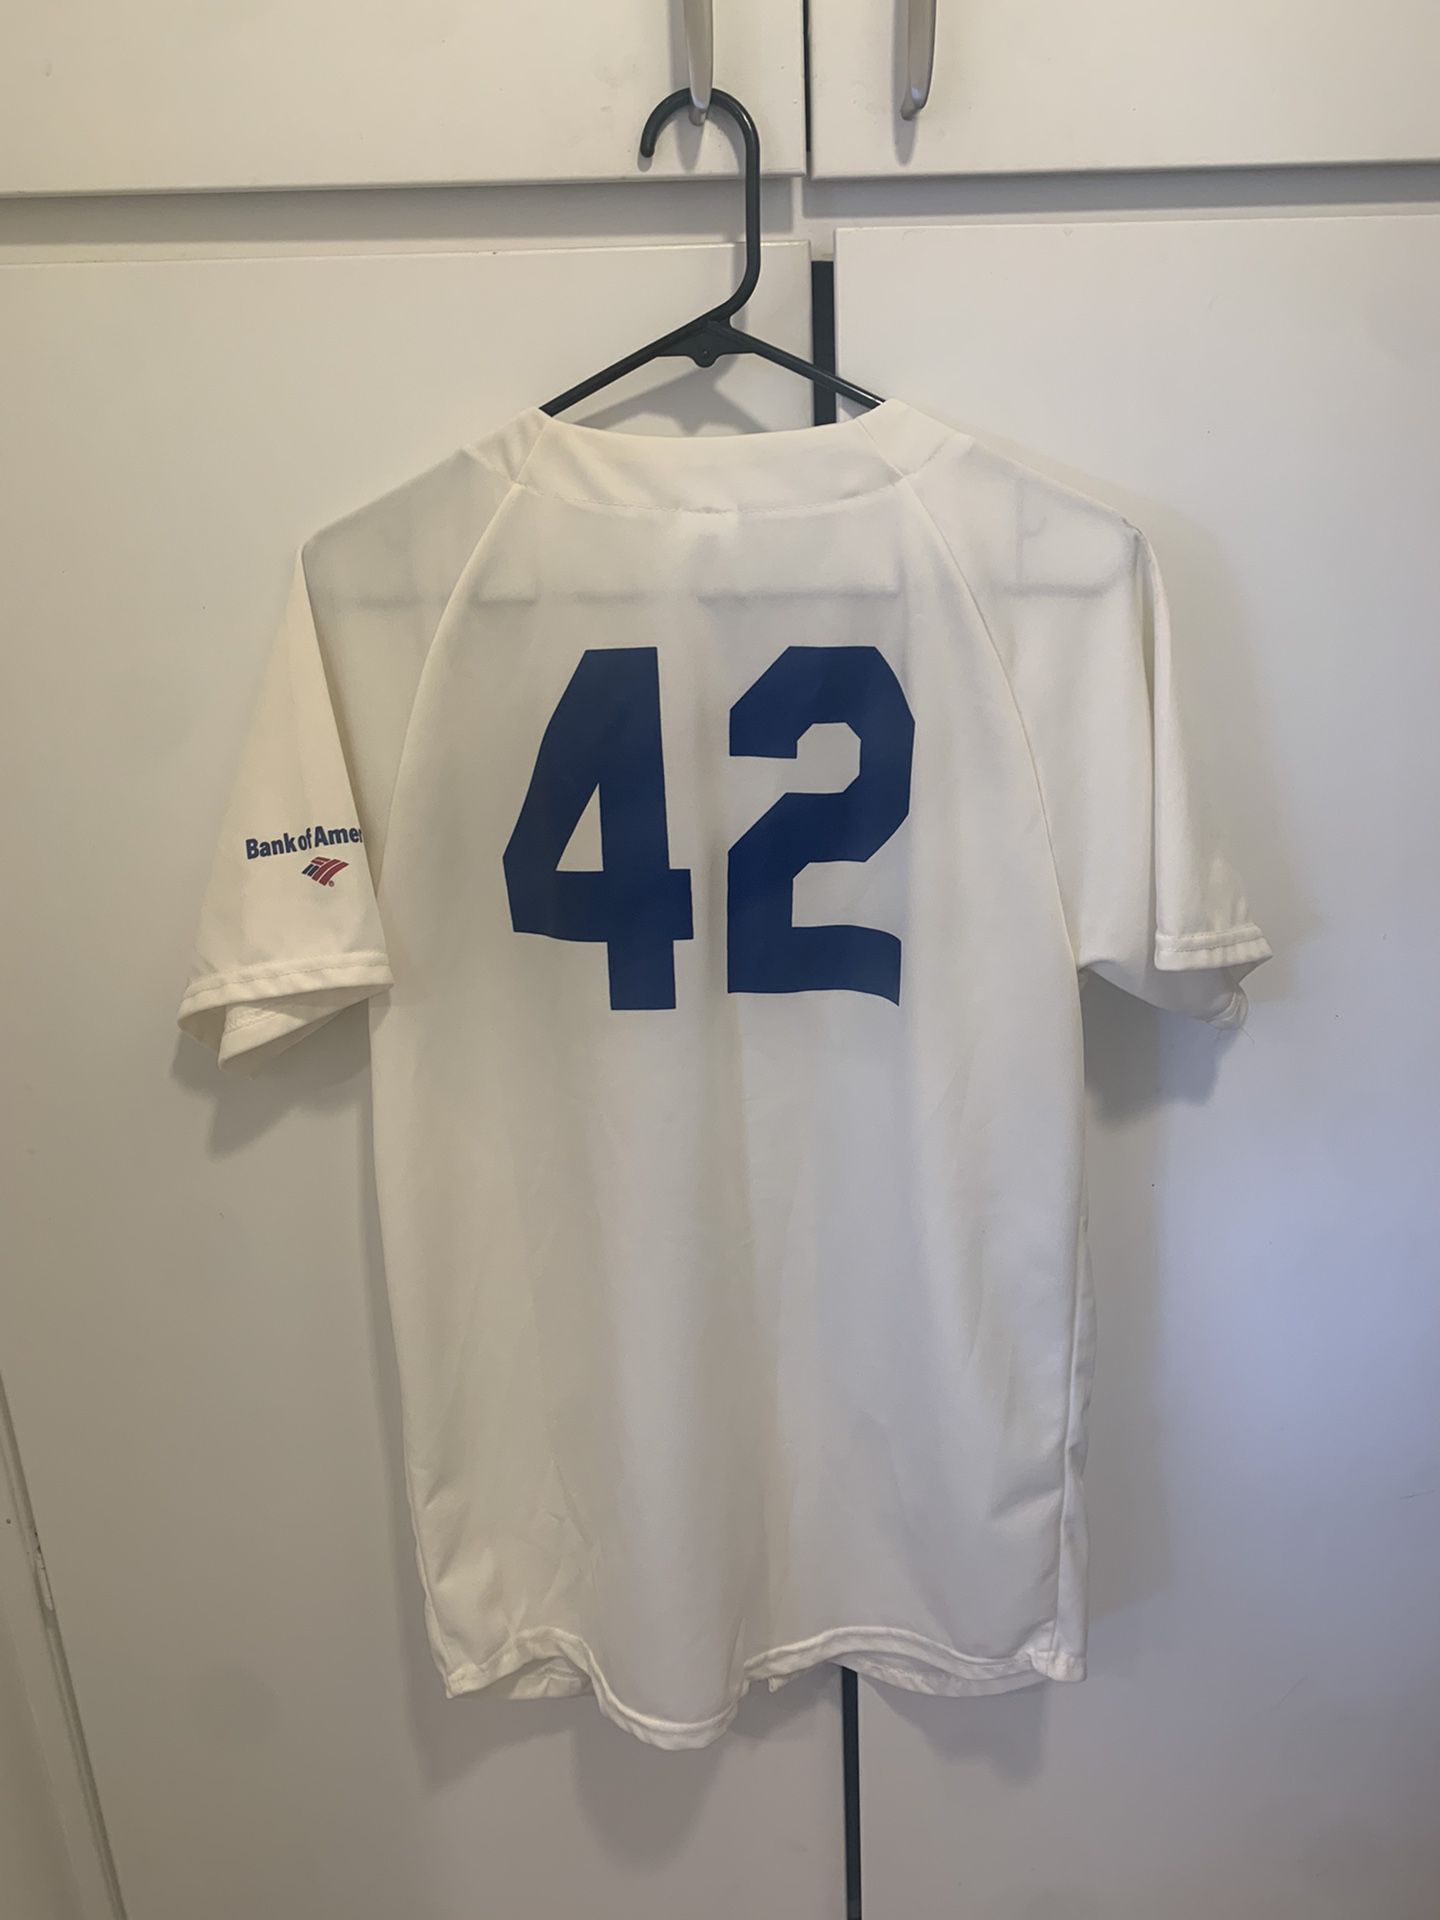 Maillot Jersey BROOKLYN DODGERS N°42 JACKIE ROBINSON 1955 USA baseball  official